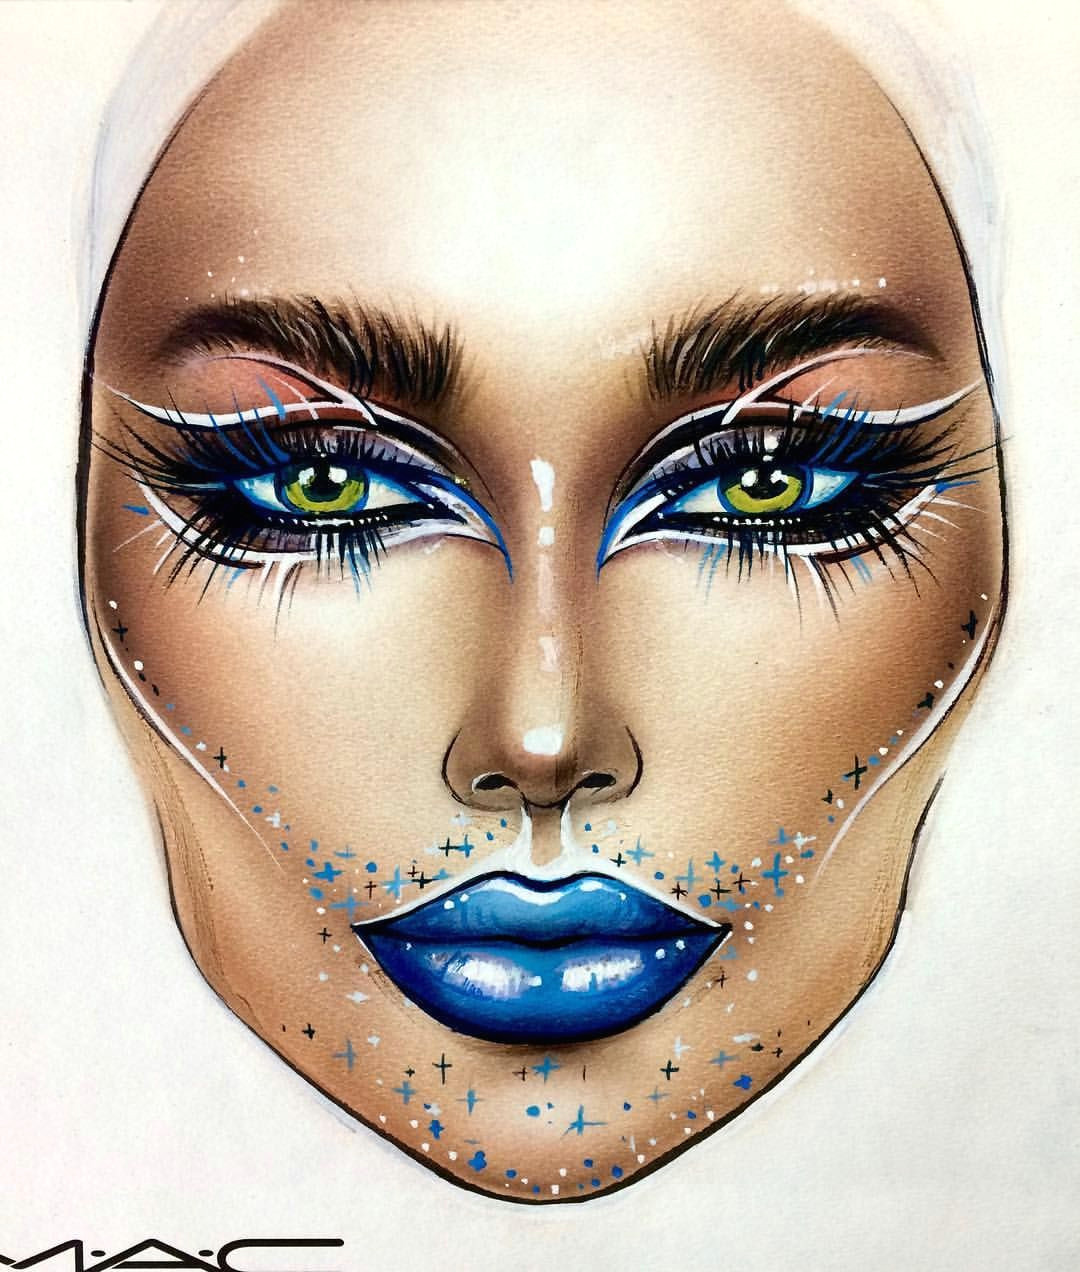 pin by cheyanne braun on face chart inspirations in 2019 makeup face charts makeup makeup inspo